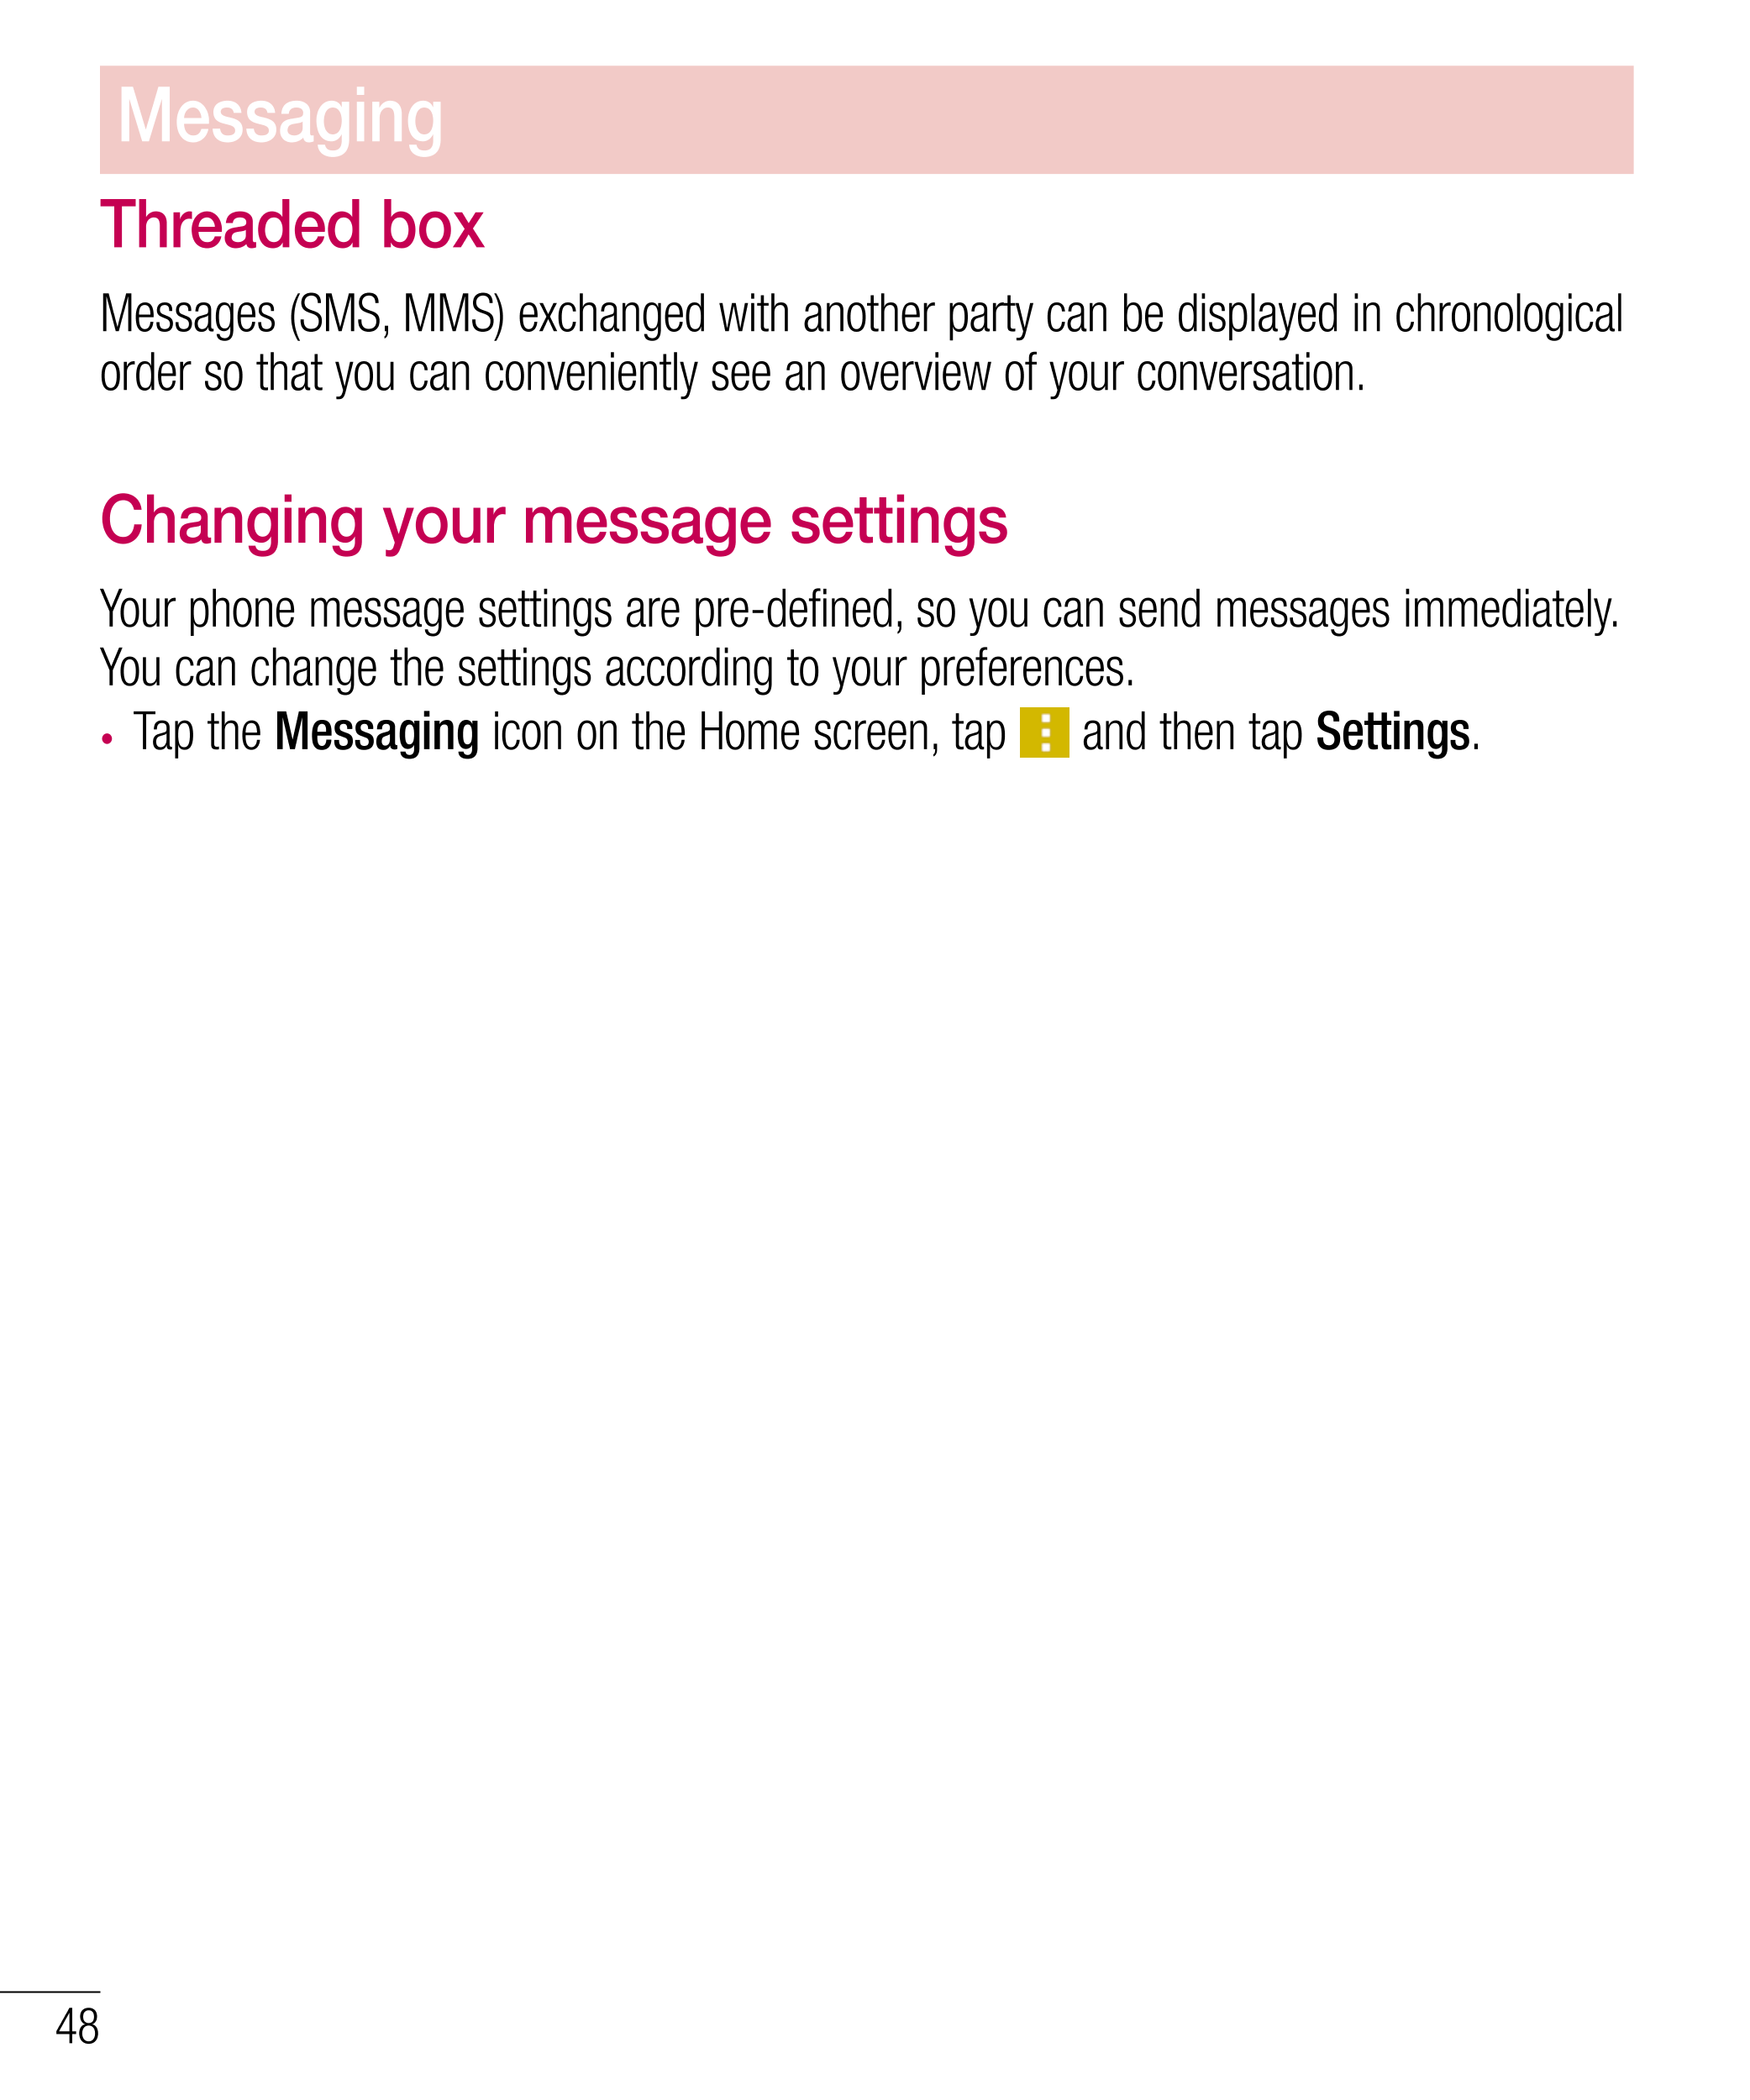 Messaging
Threaded box 
Messages (SMS, MMS) exchanged with another party can be displayed in chronological 
order so that you ca